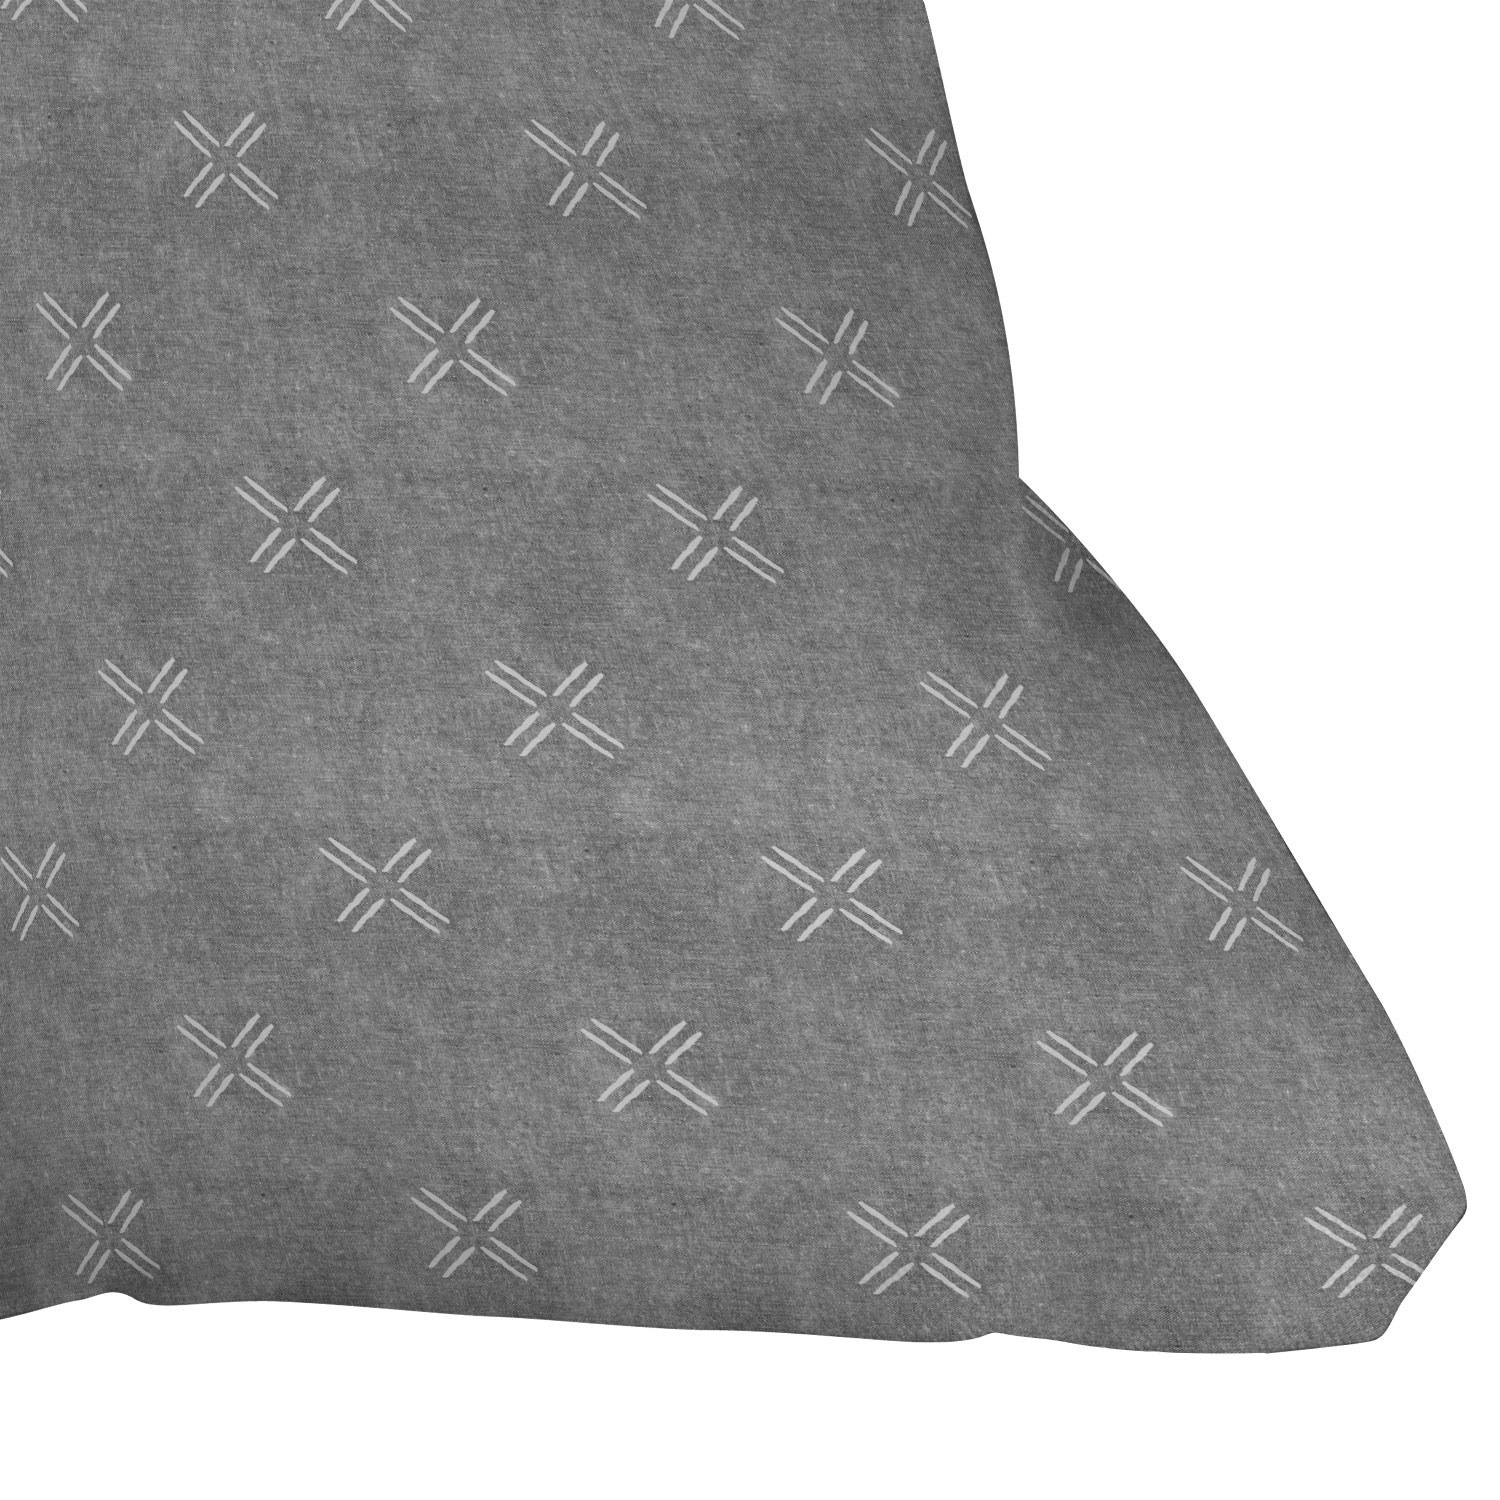 Mud Cloth Cross Gray by Little Arrow Design Co - Outdoor Throw Pillow 26" x 26" - Image 2